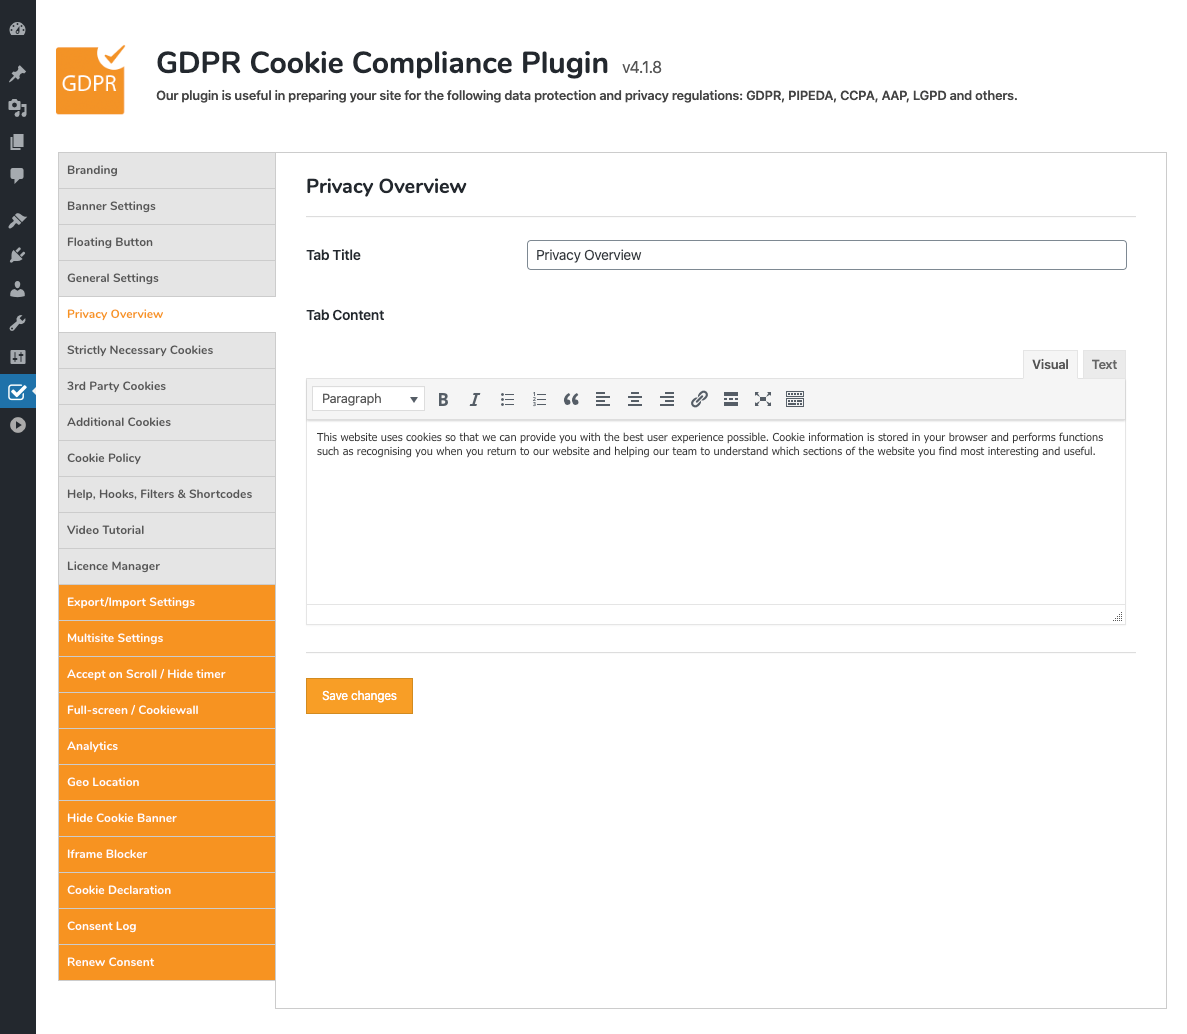 GDPR Cookie Compliance - Admin - Privacy Overview